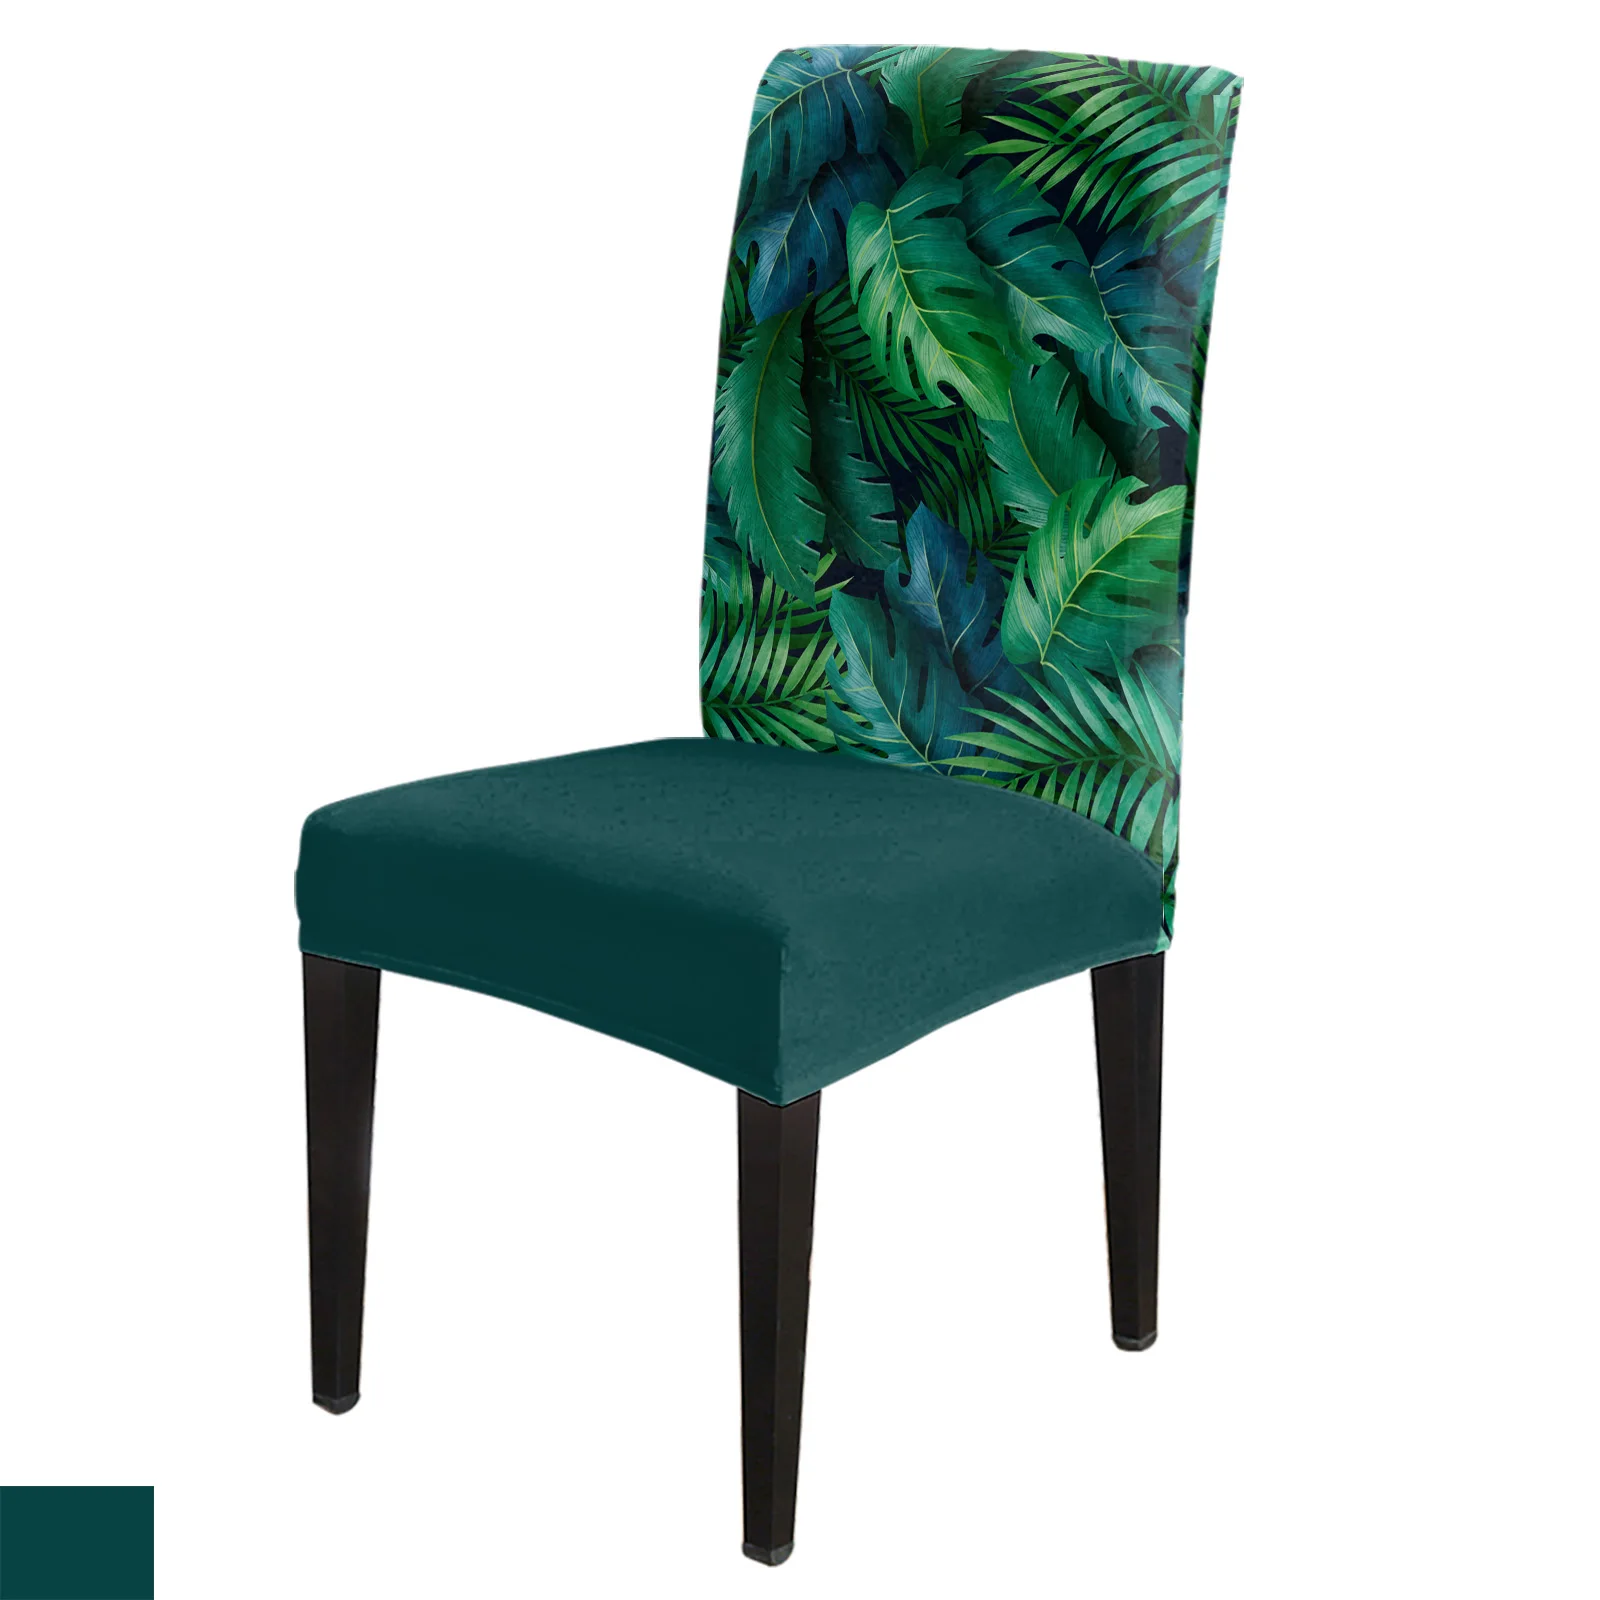 

Green Leaves Plants Tropical Jungle Chair Cover Dining Spandex Stretch Seat Covers Home Office Decoration Desk Chair Case Set